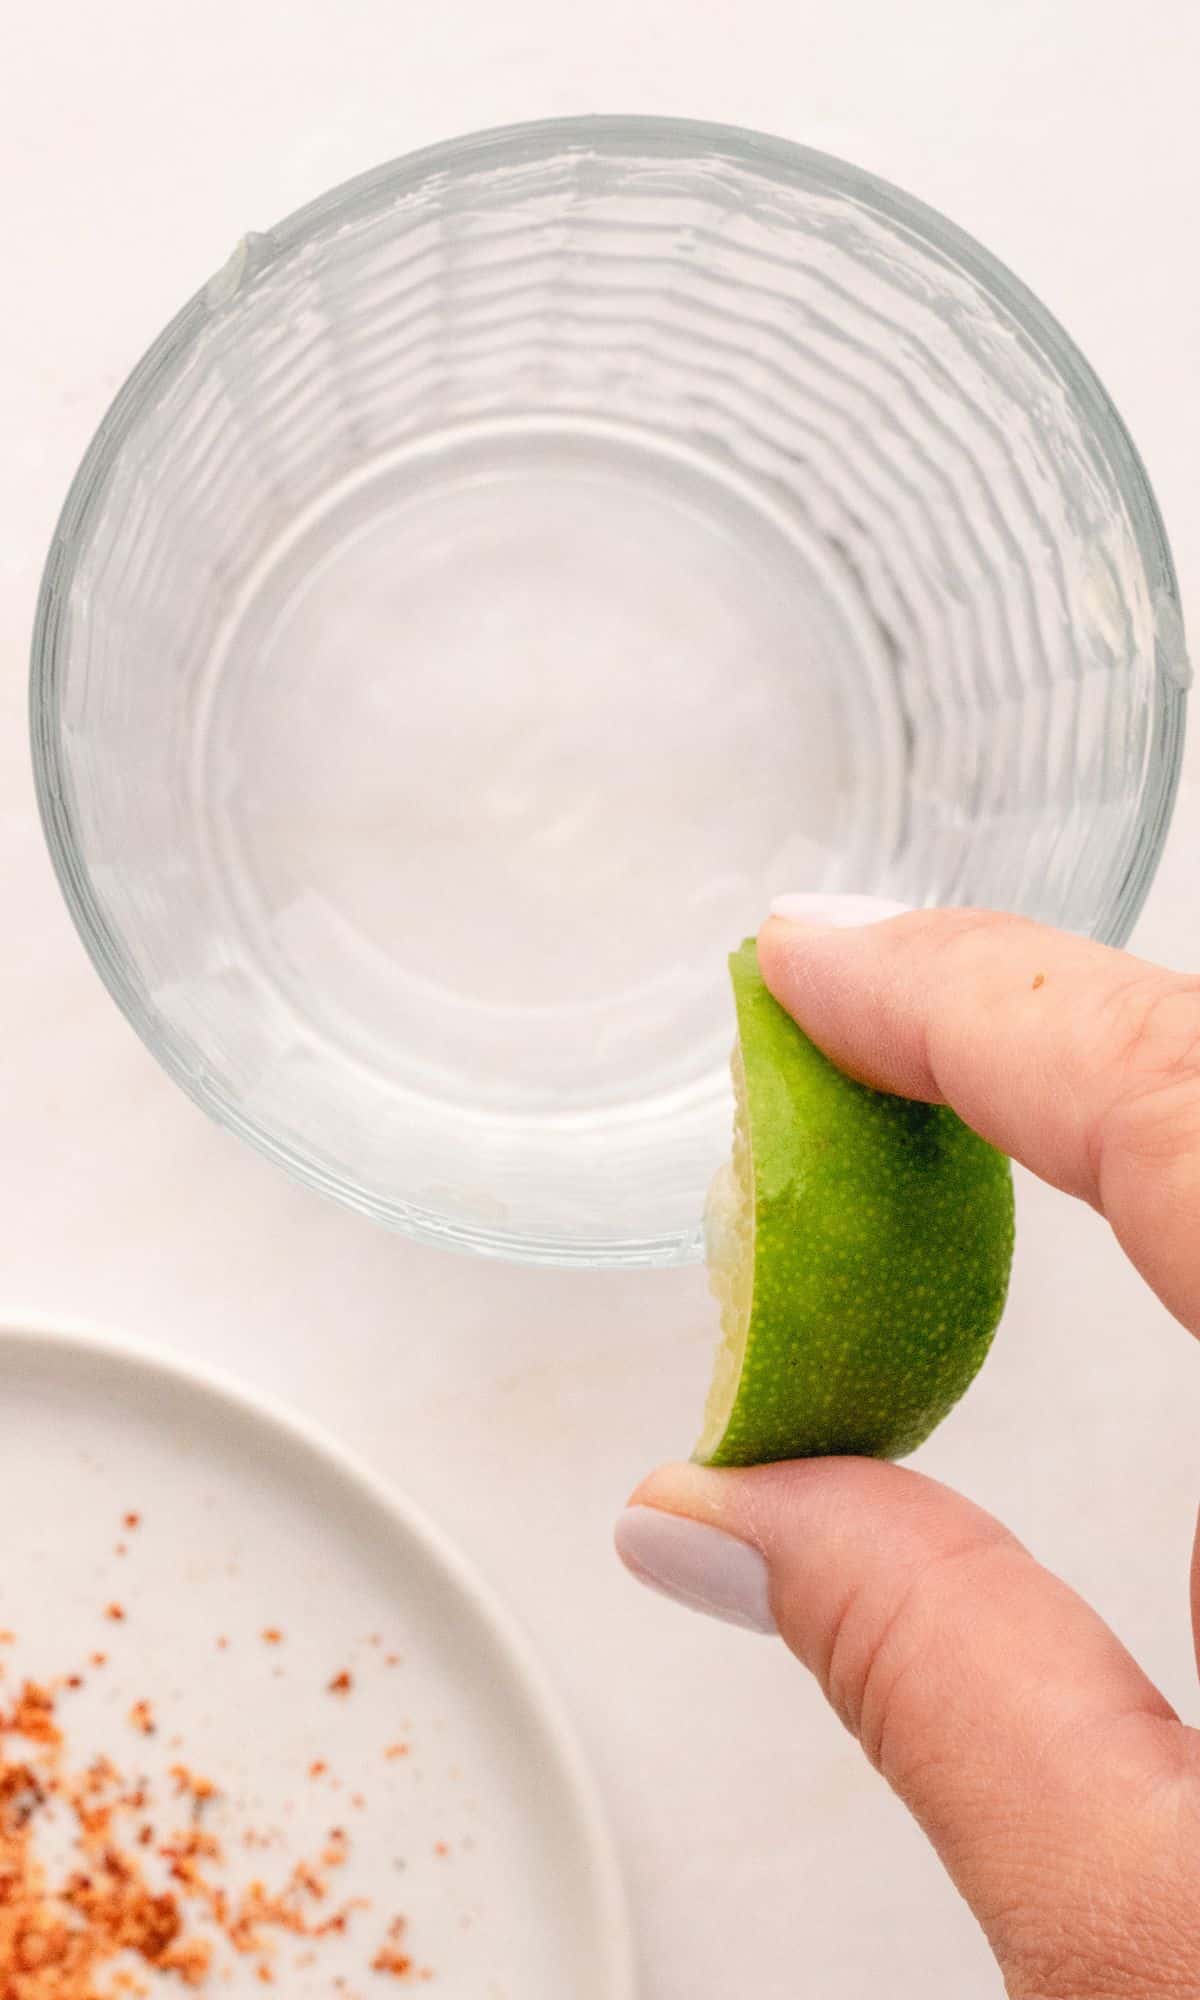 A lime wedge being rubbed on the rim of a glass.